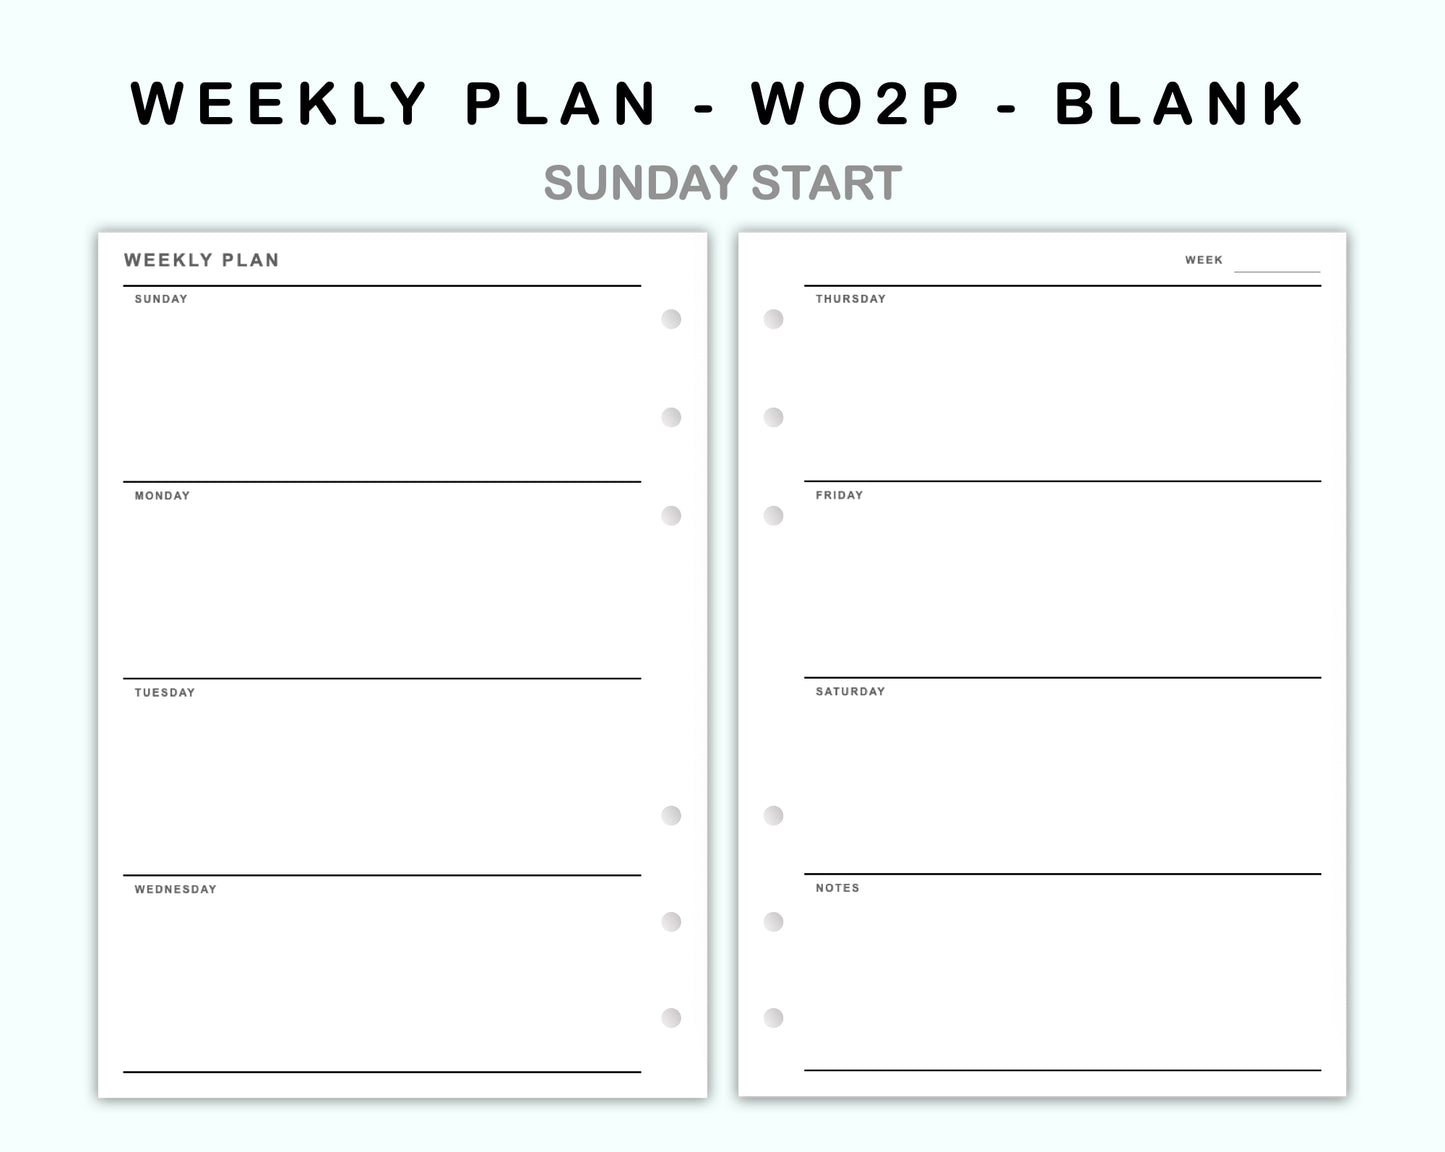 Personal Wide Inserts - Weekly Plan - WO2P - Blank